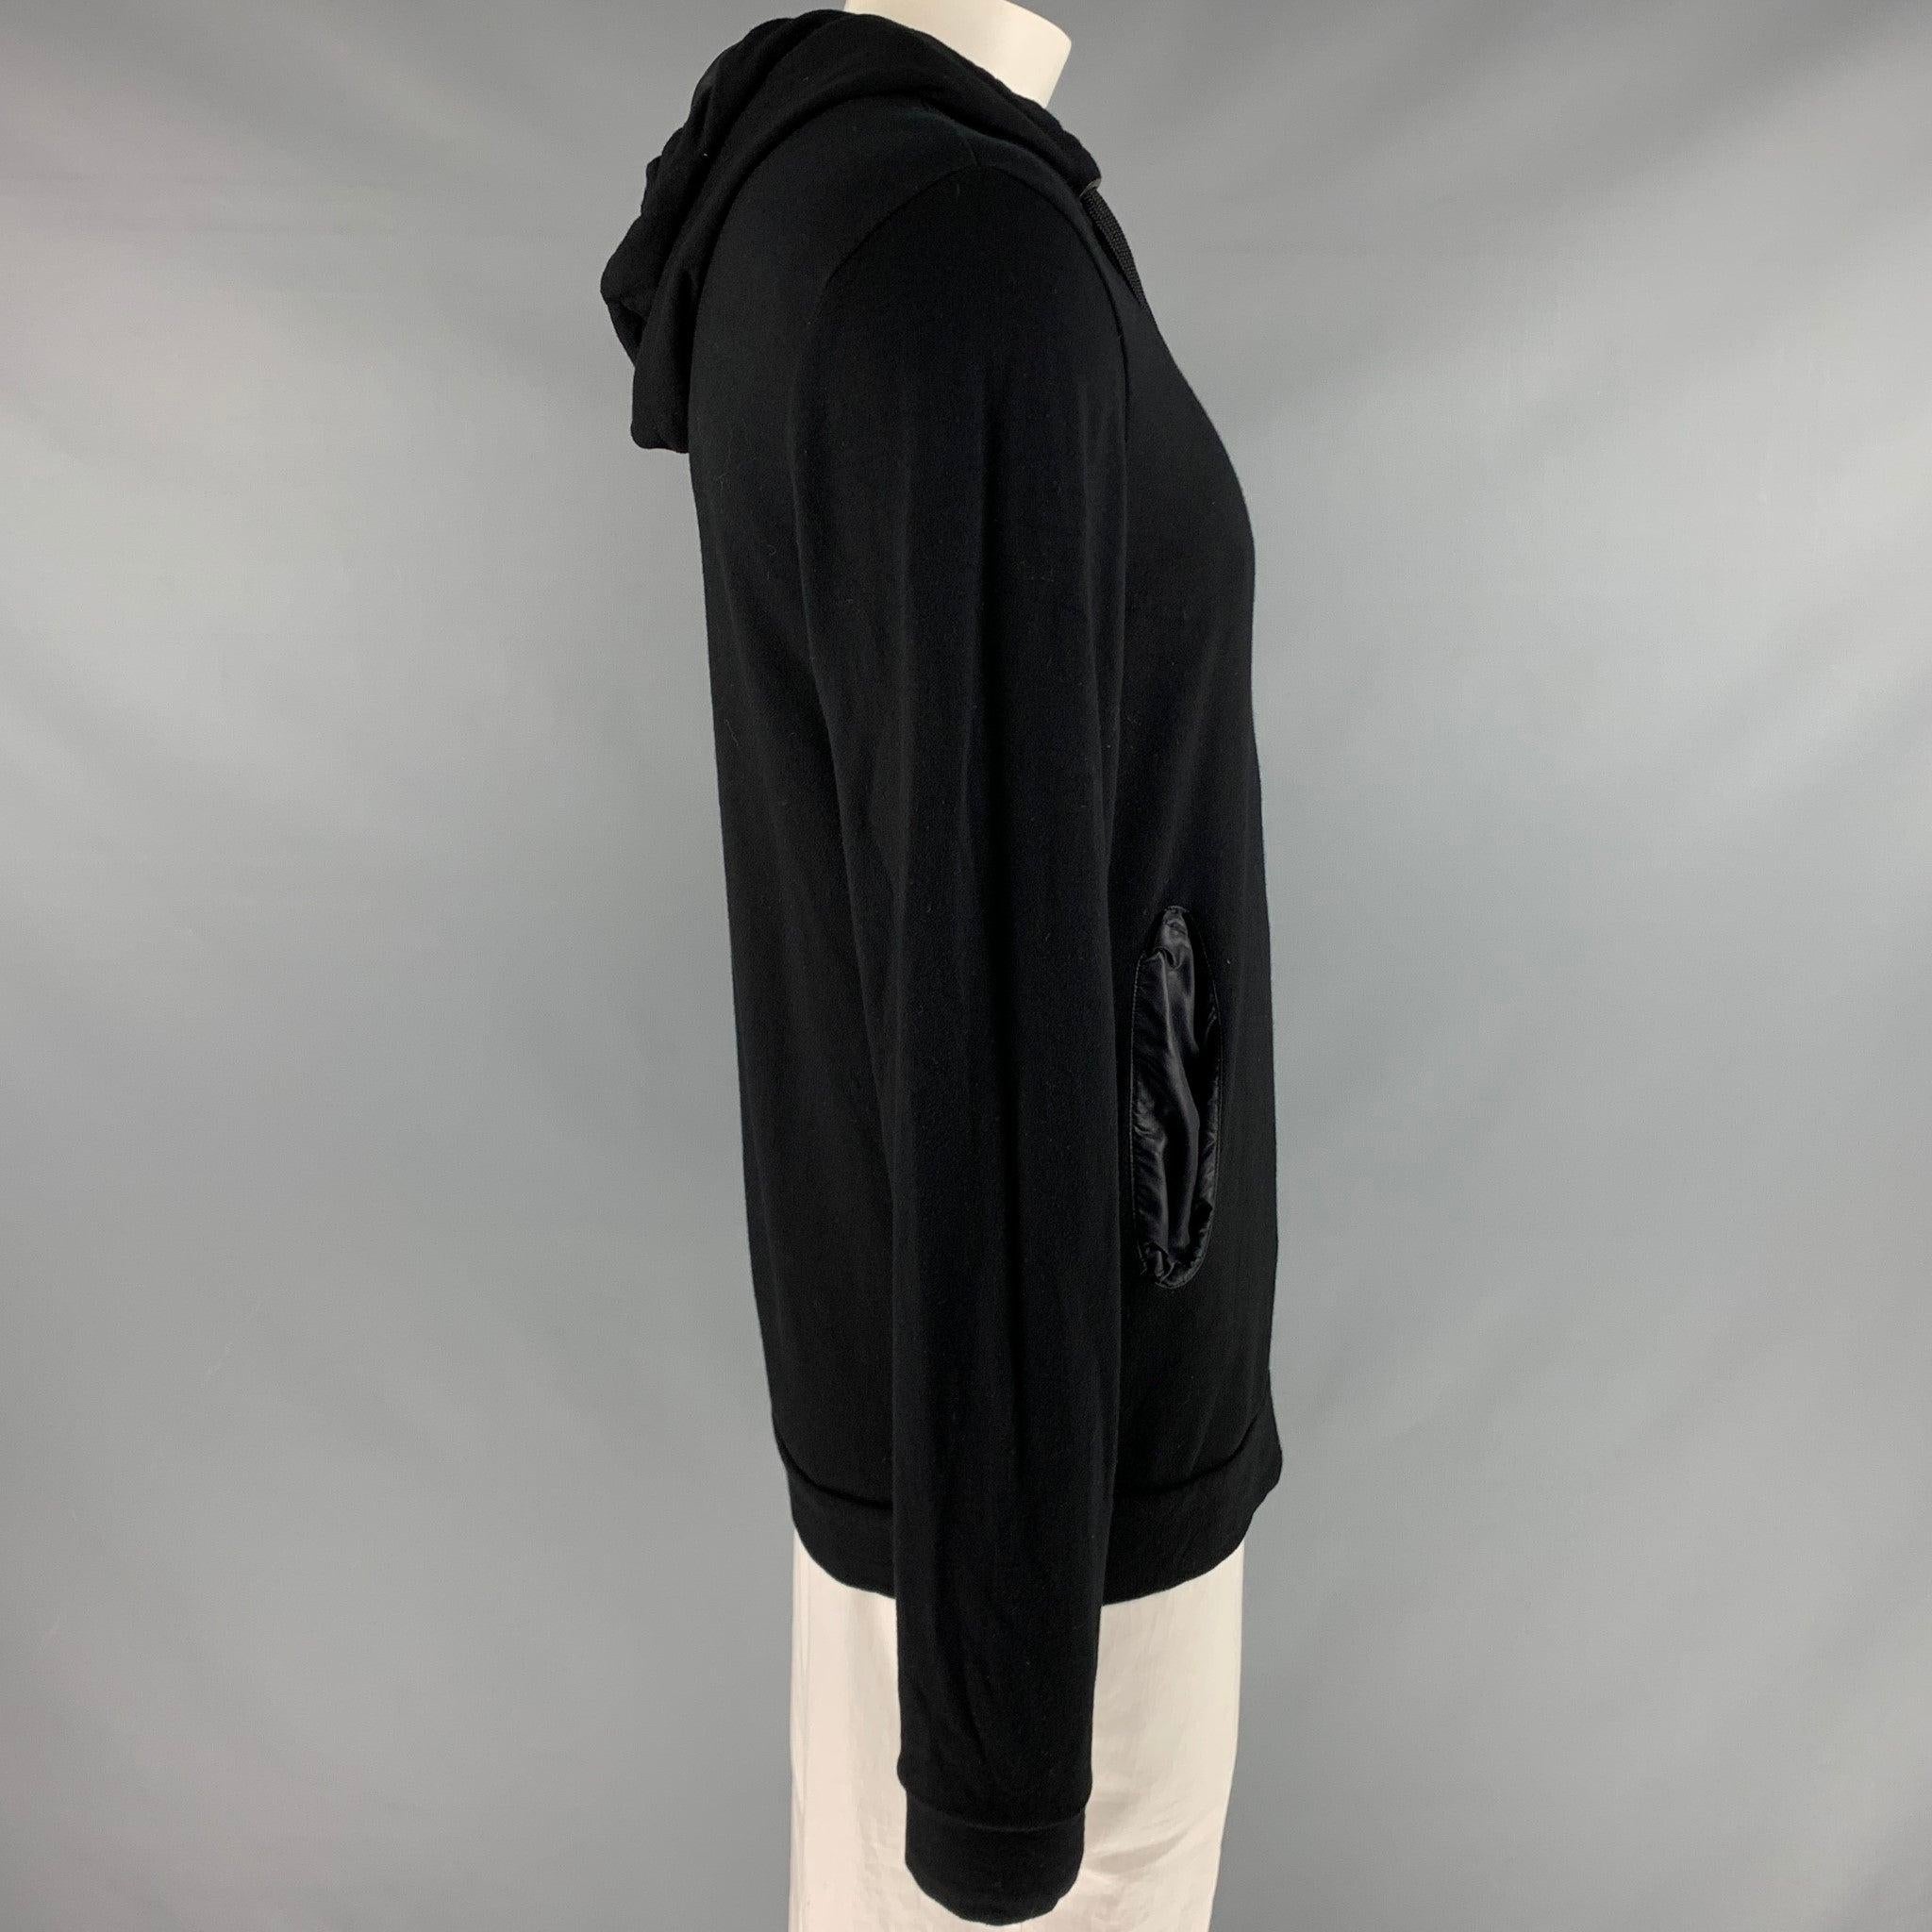 EMPORIO ARMANI sweatshirt
in a stretchy black viscose blend fabric featuring a hooded style, and satin-lined pockets.Very Good Pre-Owned Condition. Minor signs of wear. 

Marked:   XL 

Measurements: 
 
Shoulder: 18 inches Chest: 42 inches Sleeve: